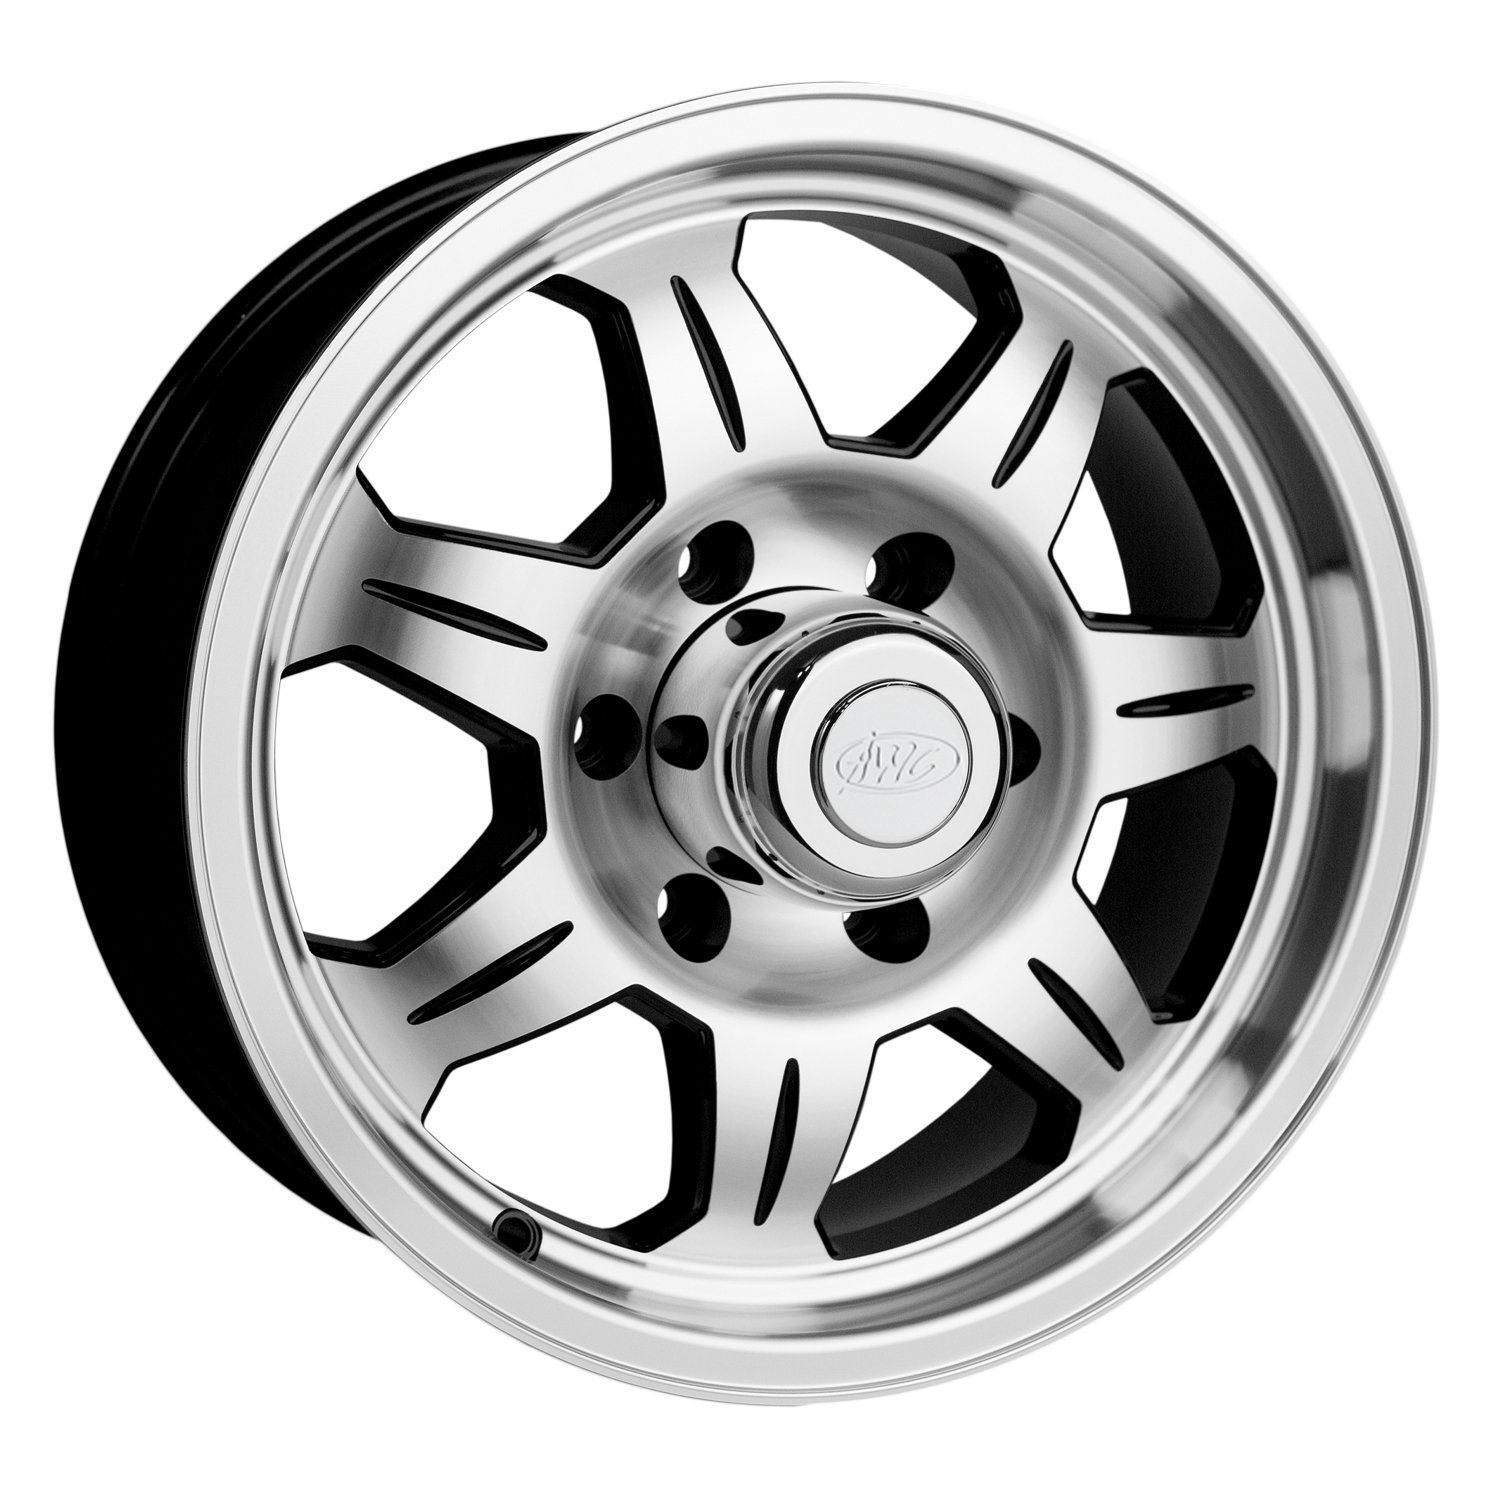 870 ELEMENT Trailer Wheel Size: 16 X 6" Bolt Pattern: 6 x 5.50" (139.70 mm) [Machined with Black Accents]